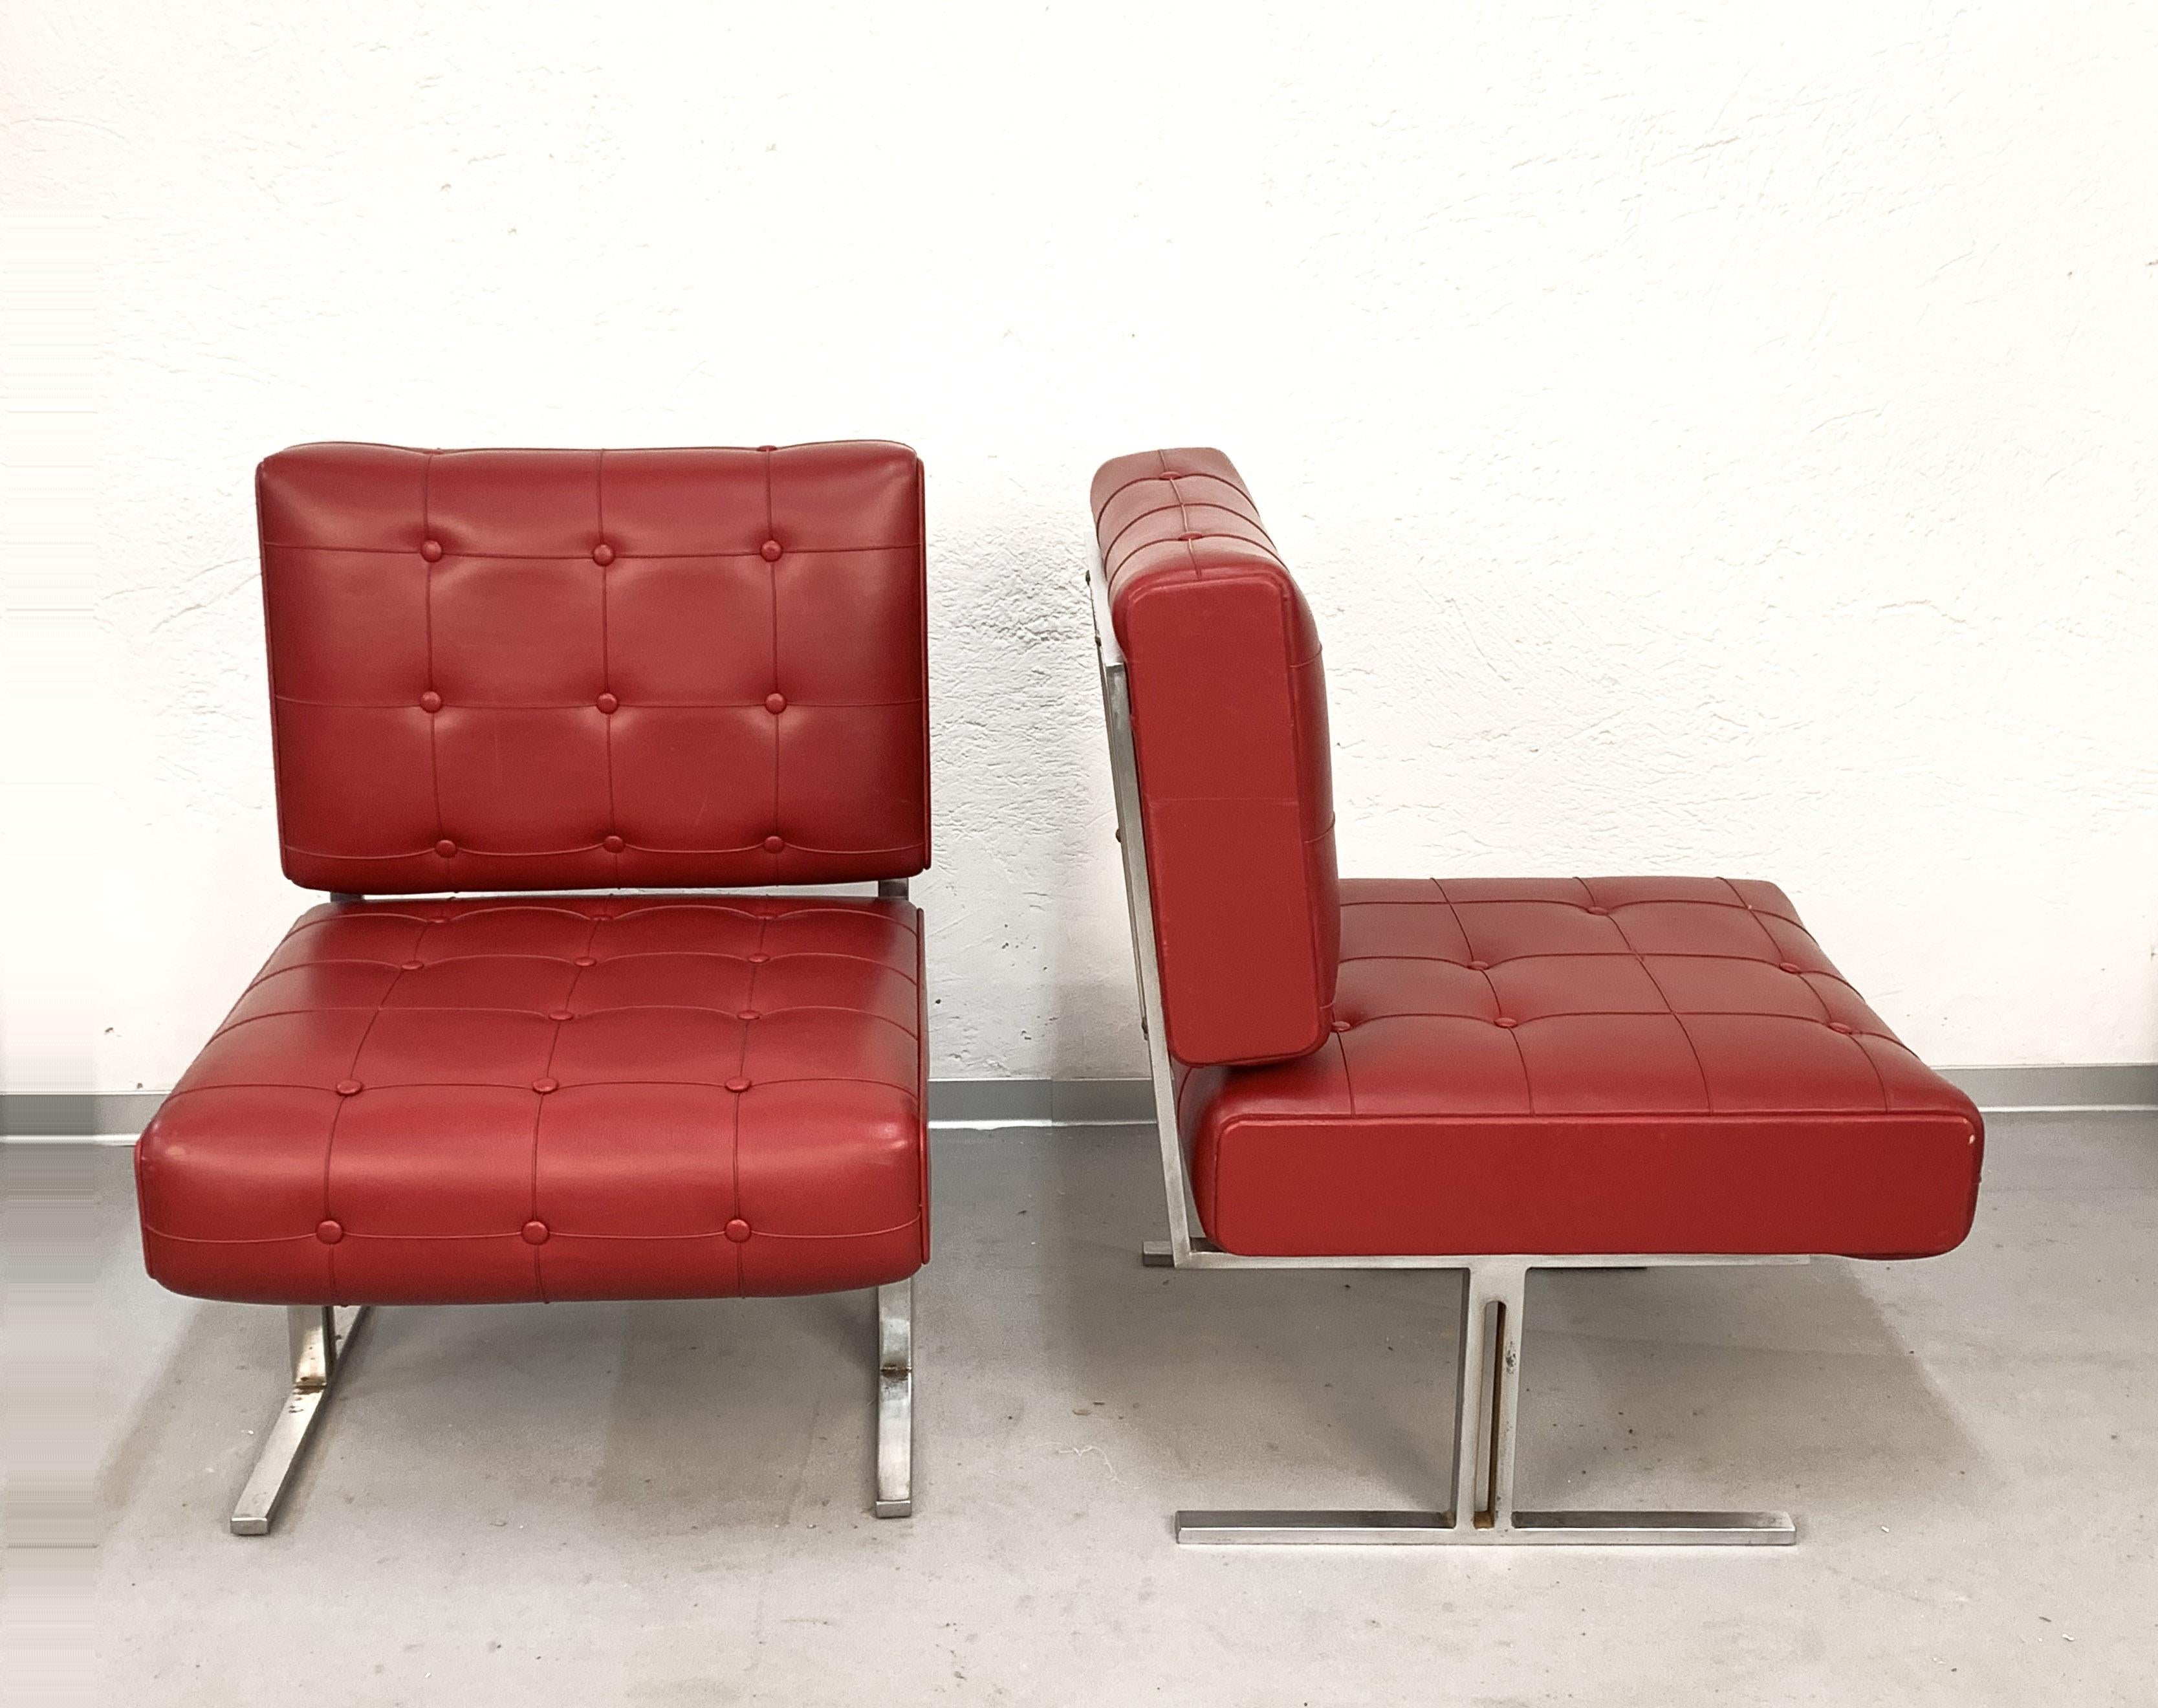 Pair of Steel Armchairs Skay Capitonne Red, Style Hausmann De Sede Italy 1950s For Sale 9